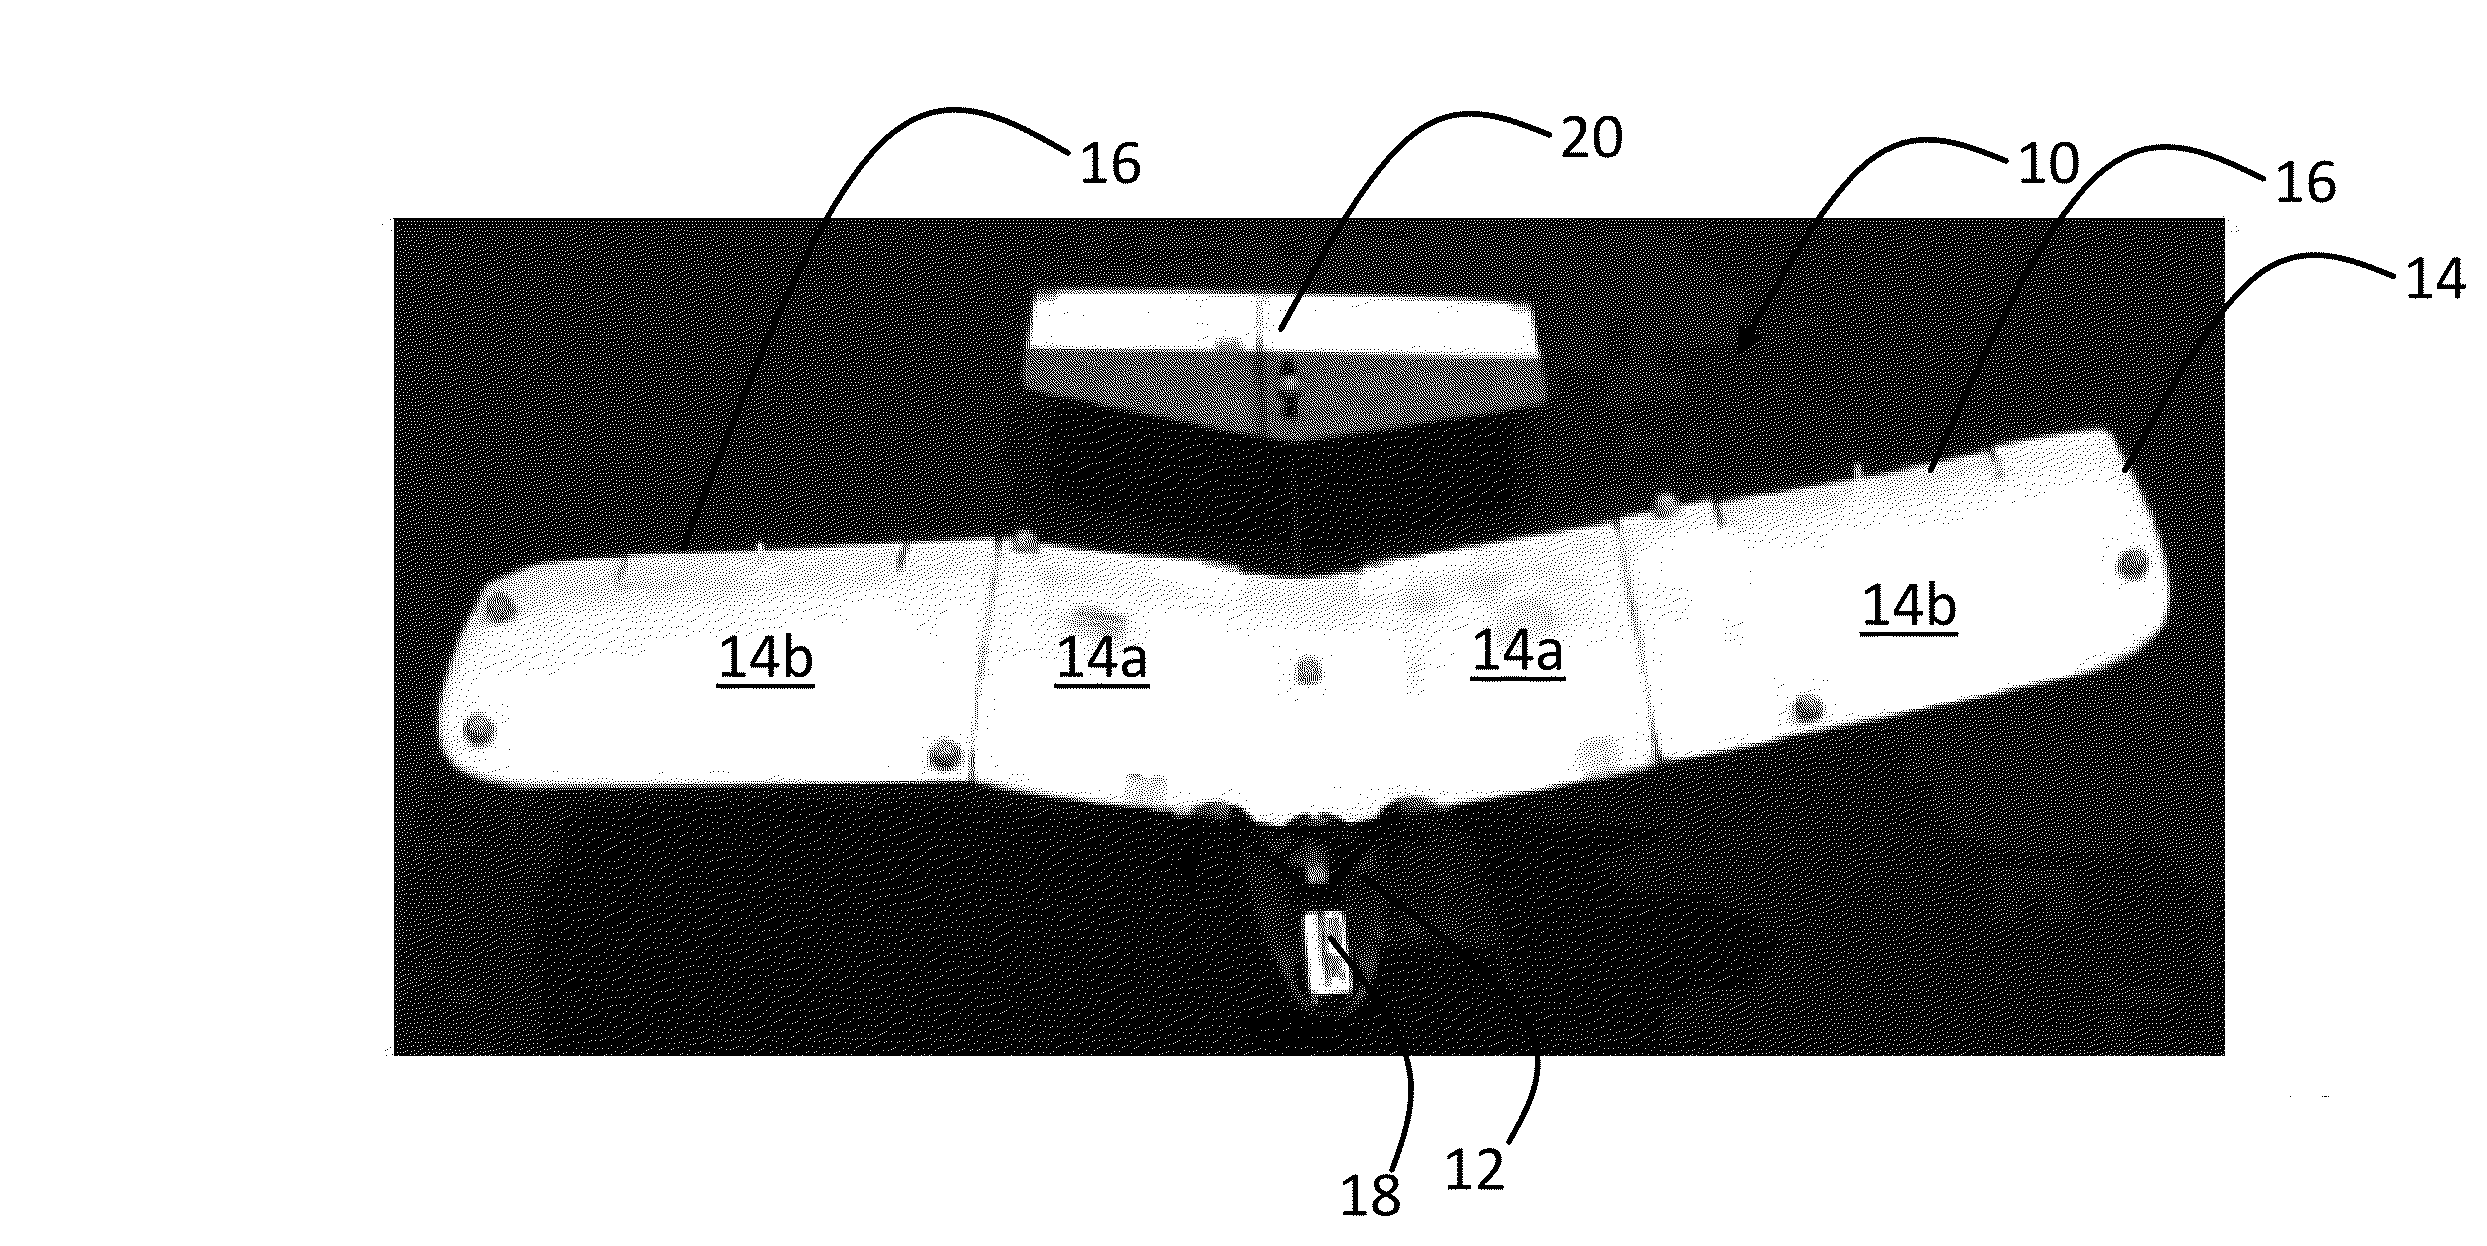 Controlled transitory or sustained gliding flight with dihedral angle and trailing flaps